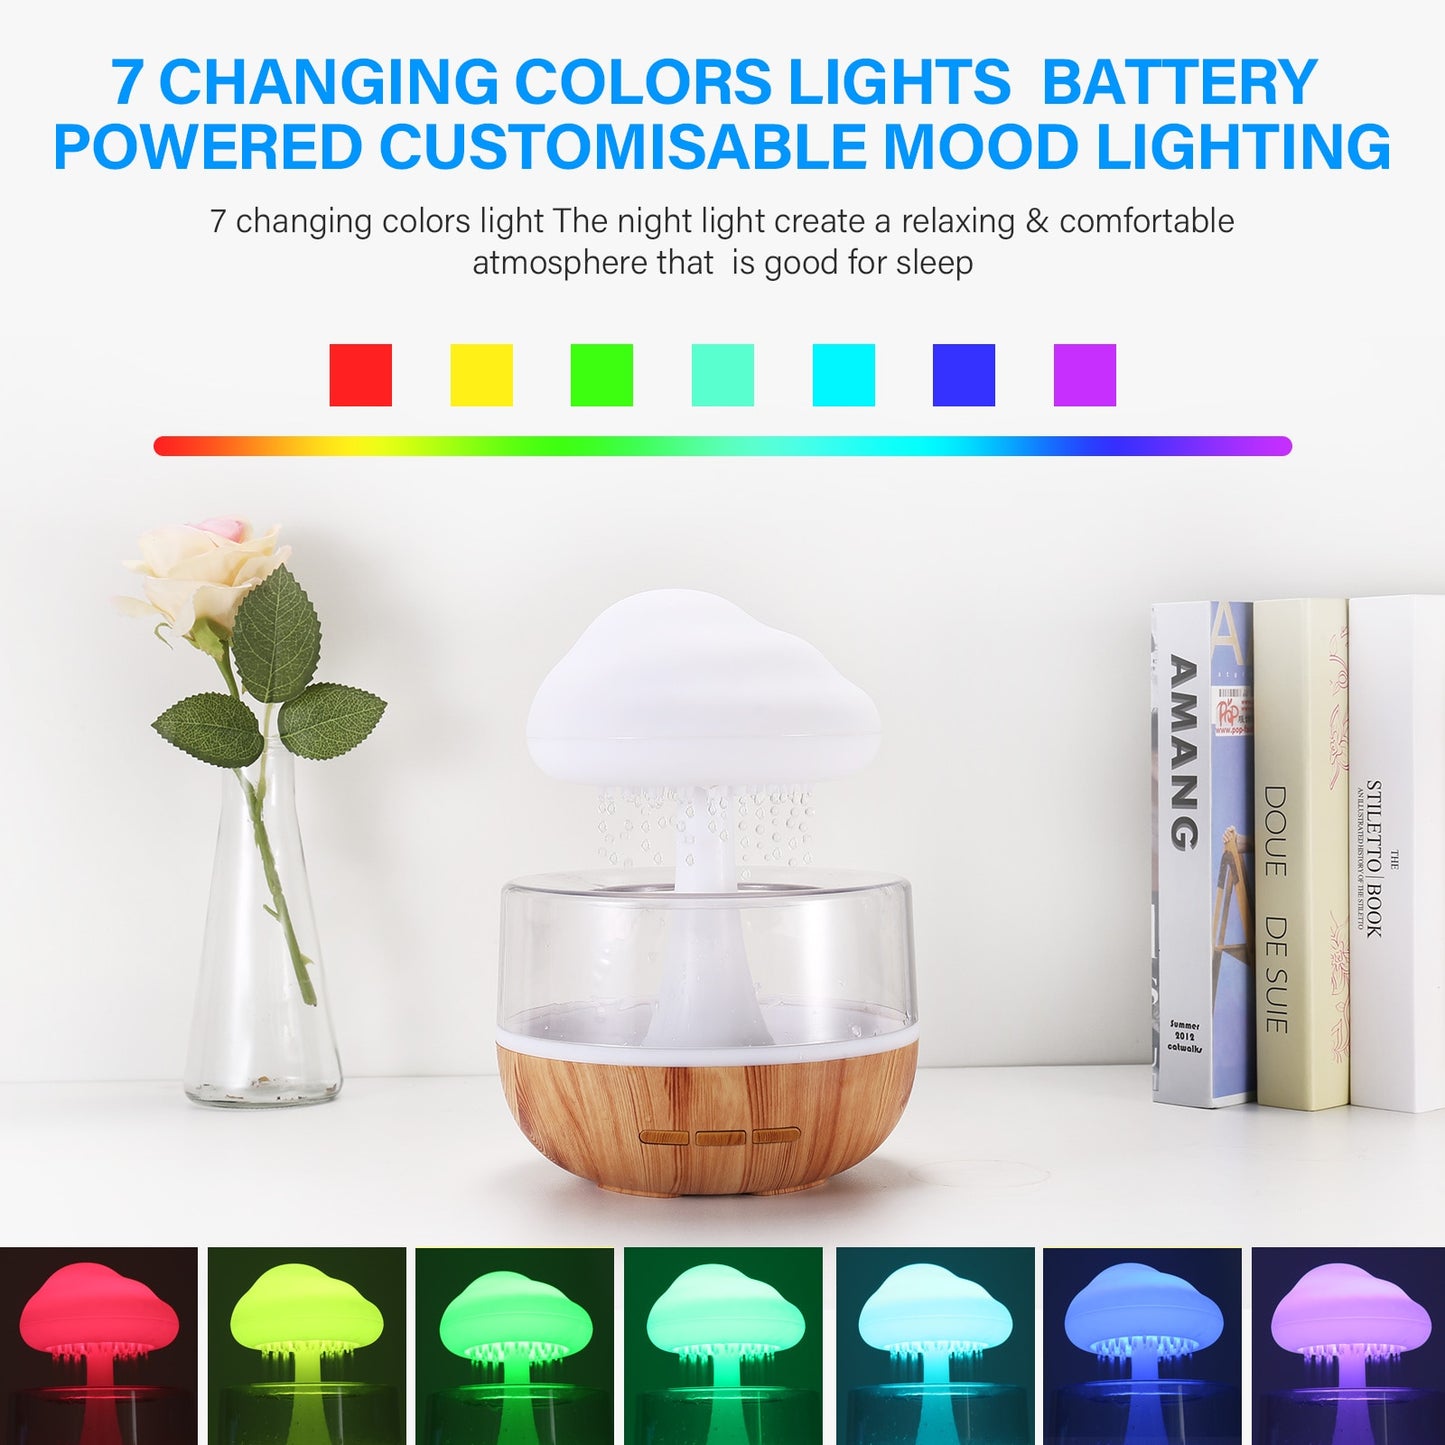 Rain Cloud Aromatherapy Diffuser and Humidifier